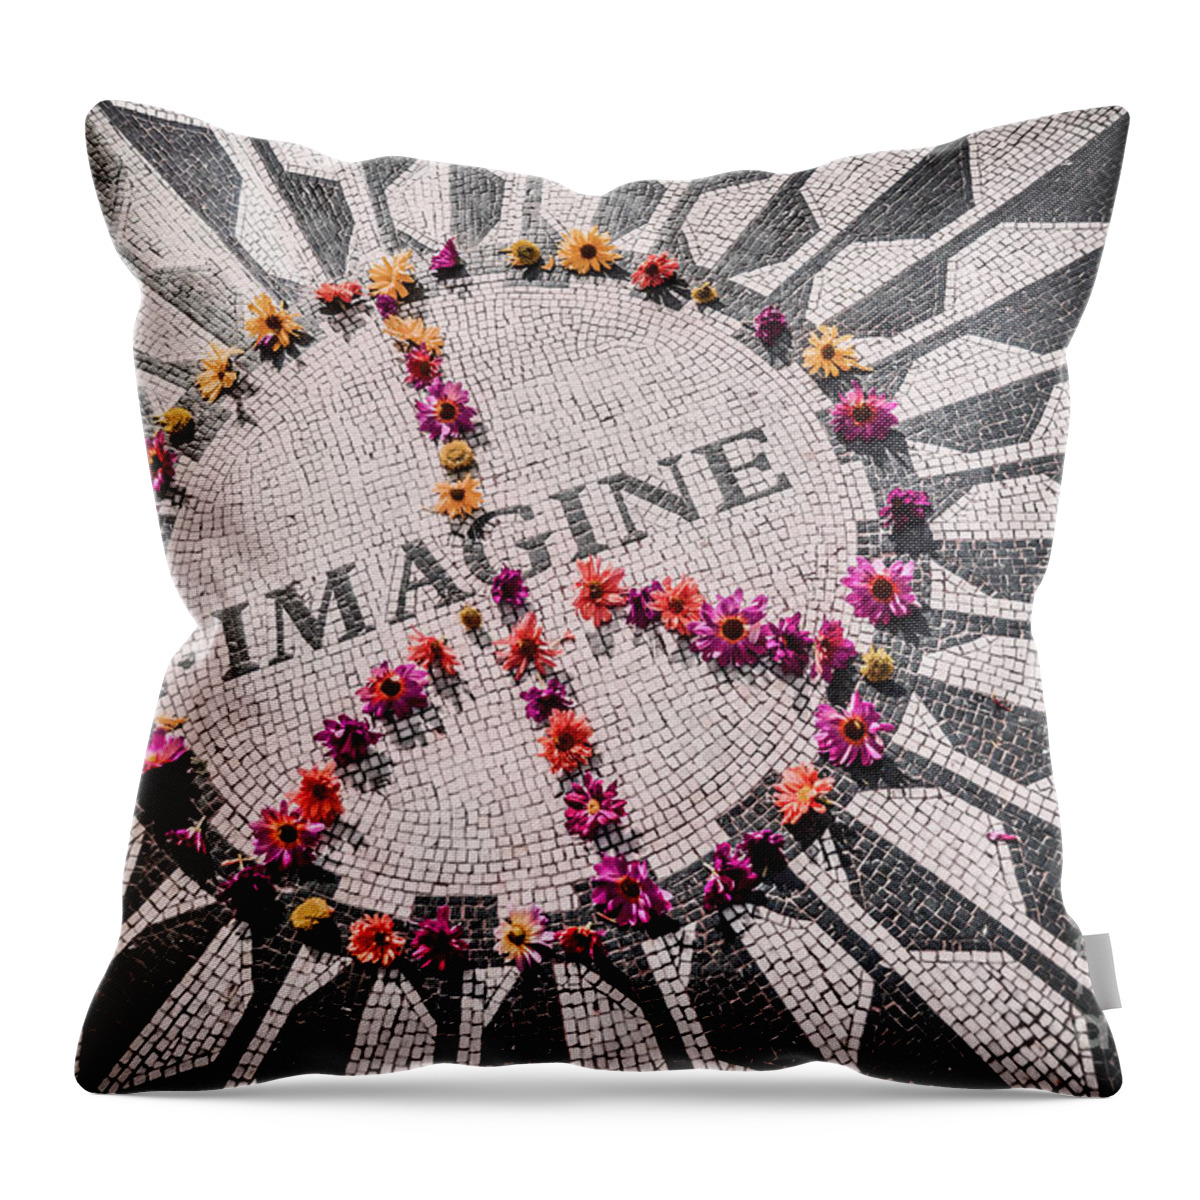 John Lennon Throw Pillow featuring the photograph Imagine Peace by Stacey Granger